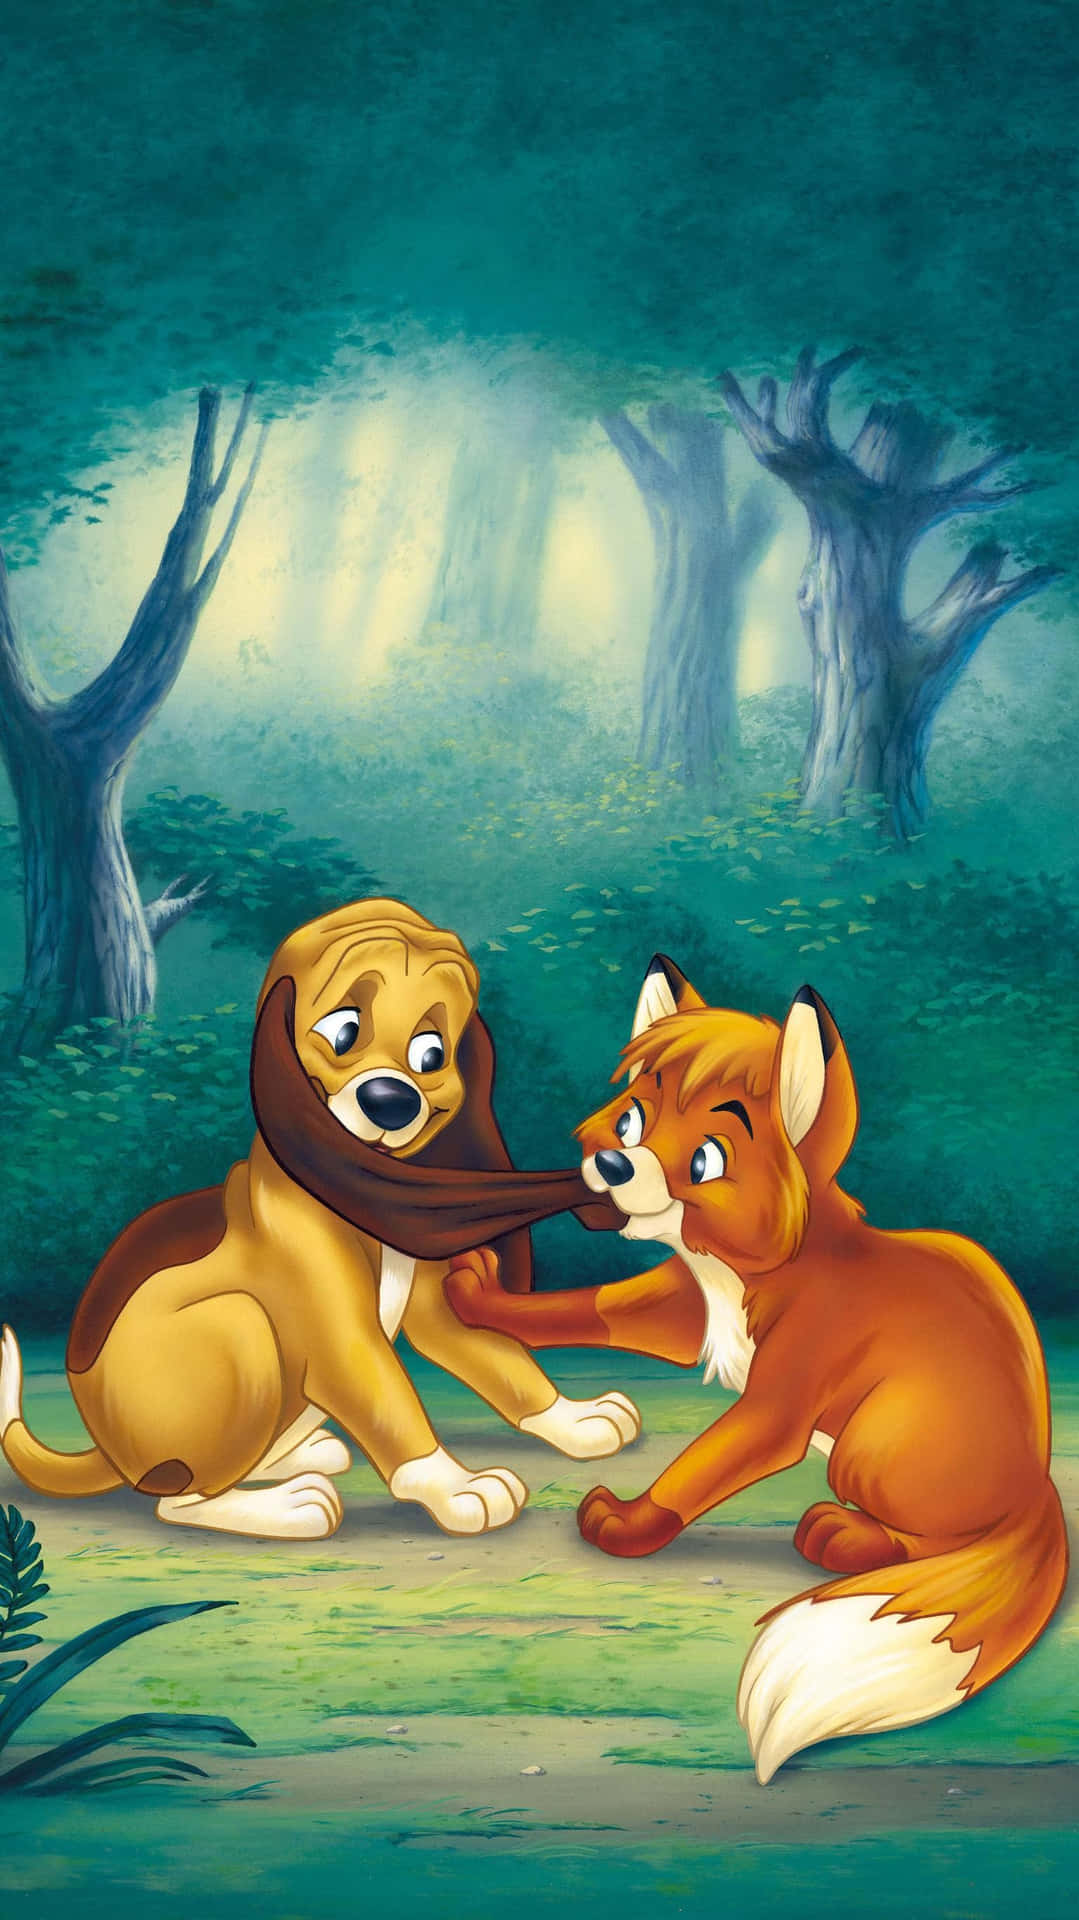 The Endearing Friendship Between Tod And Copper In The Fox And The Hound Background